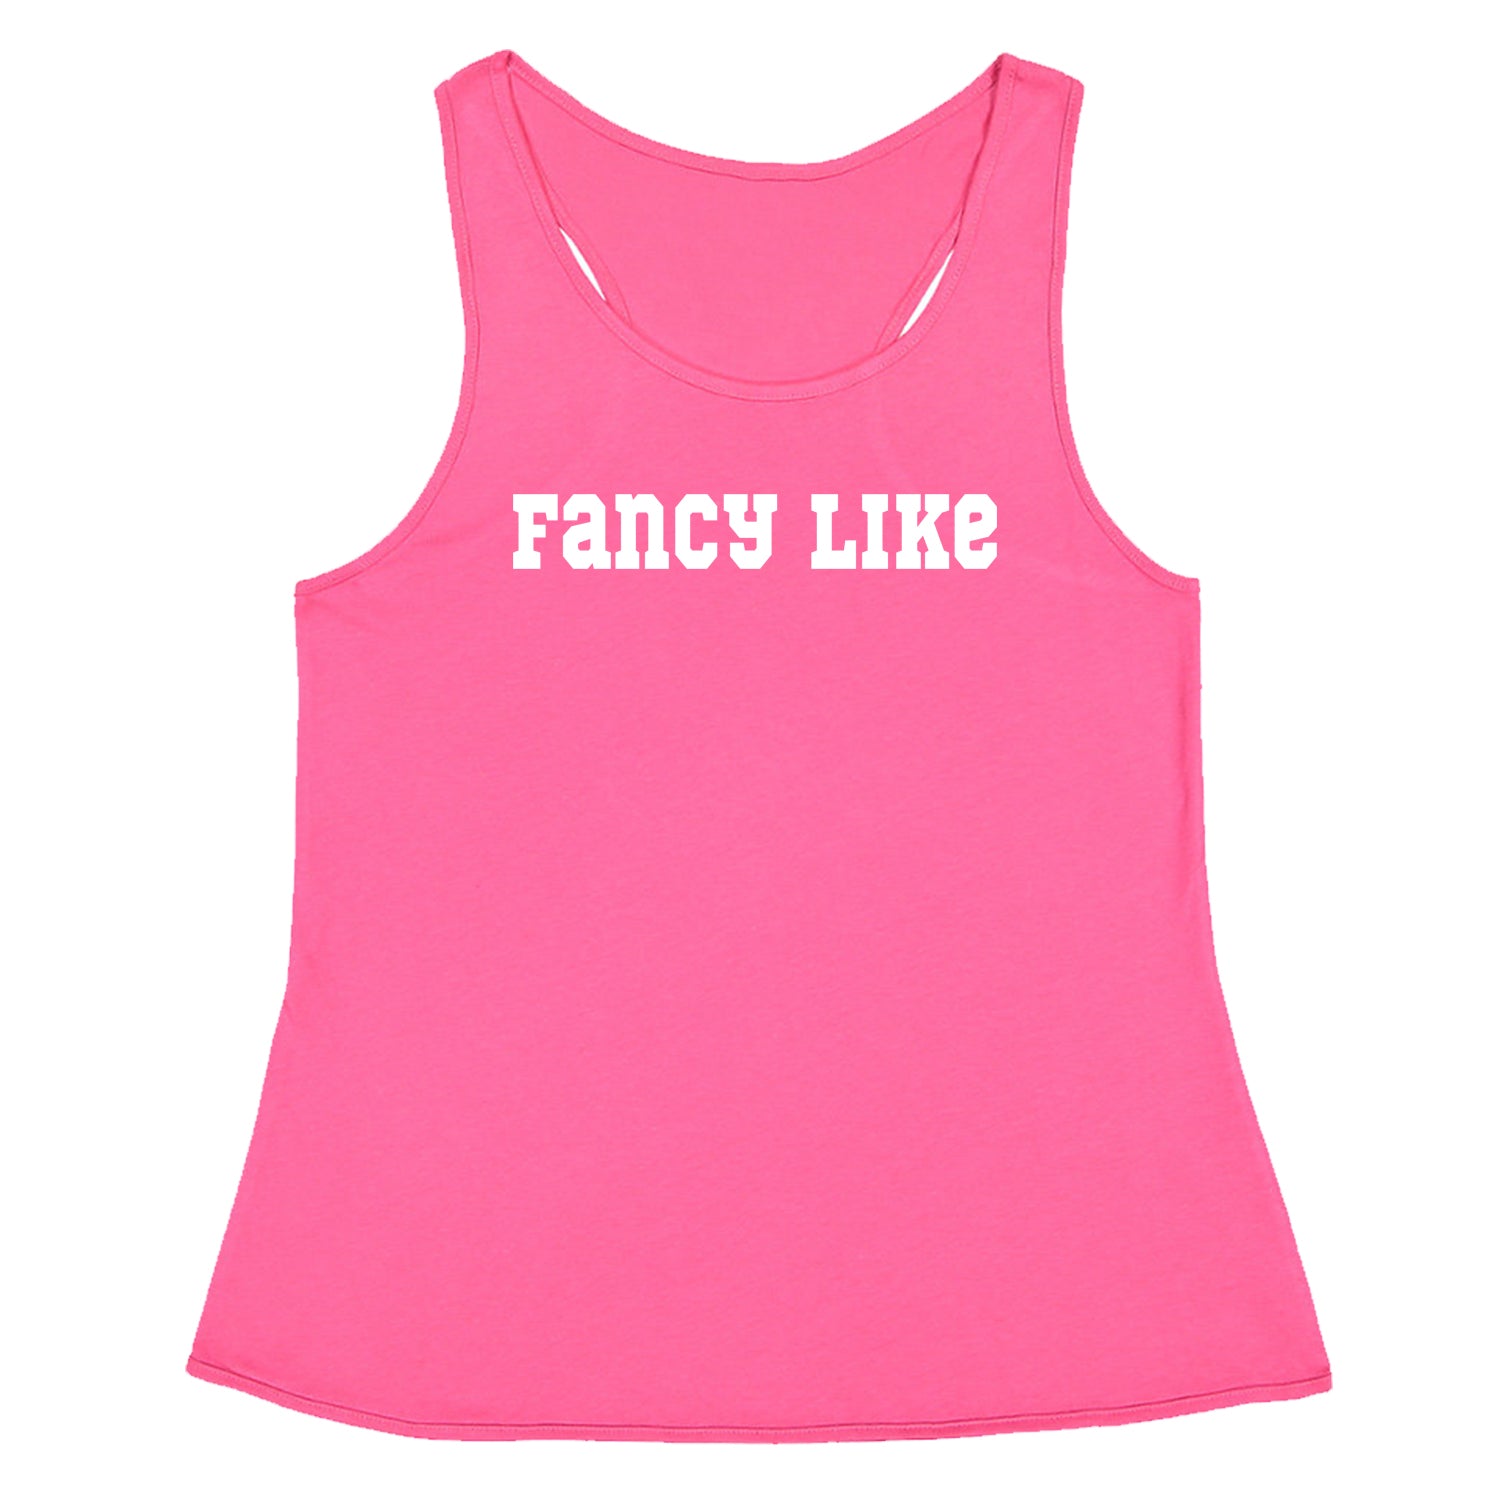 Fancy Like Racerback Tank Top for Women hayes, walter by Expression Tees